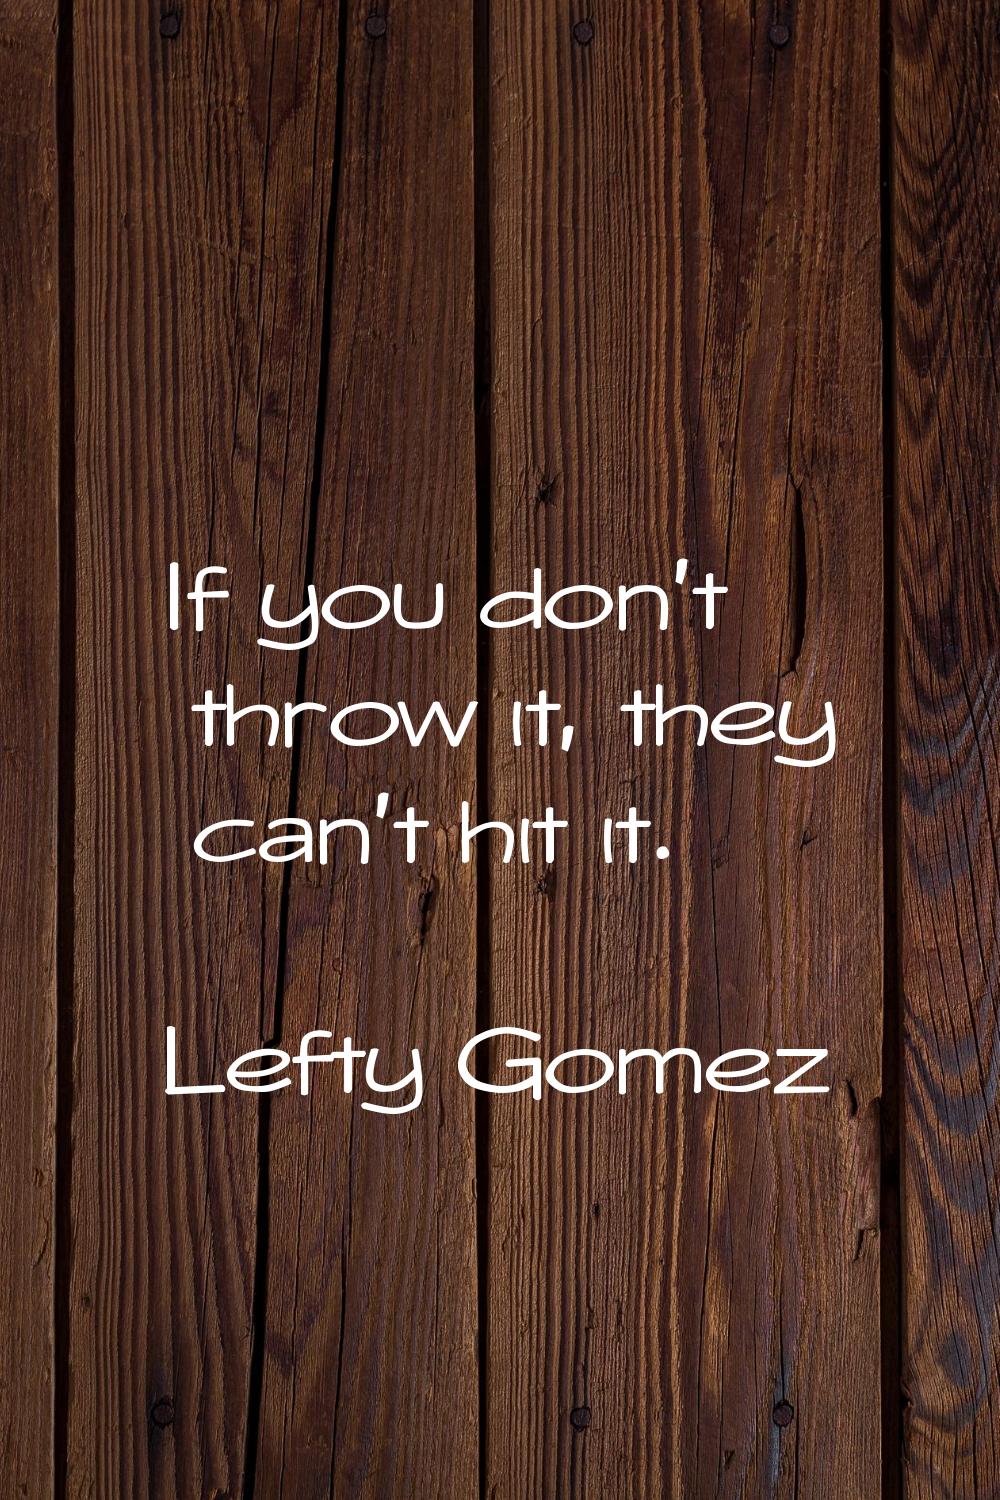 If you don't throw it, they can't hit it.